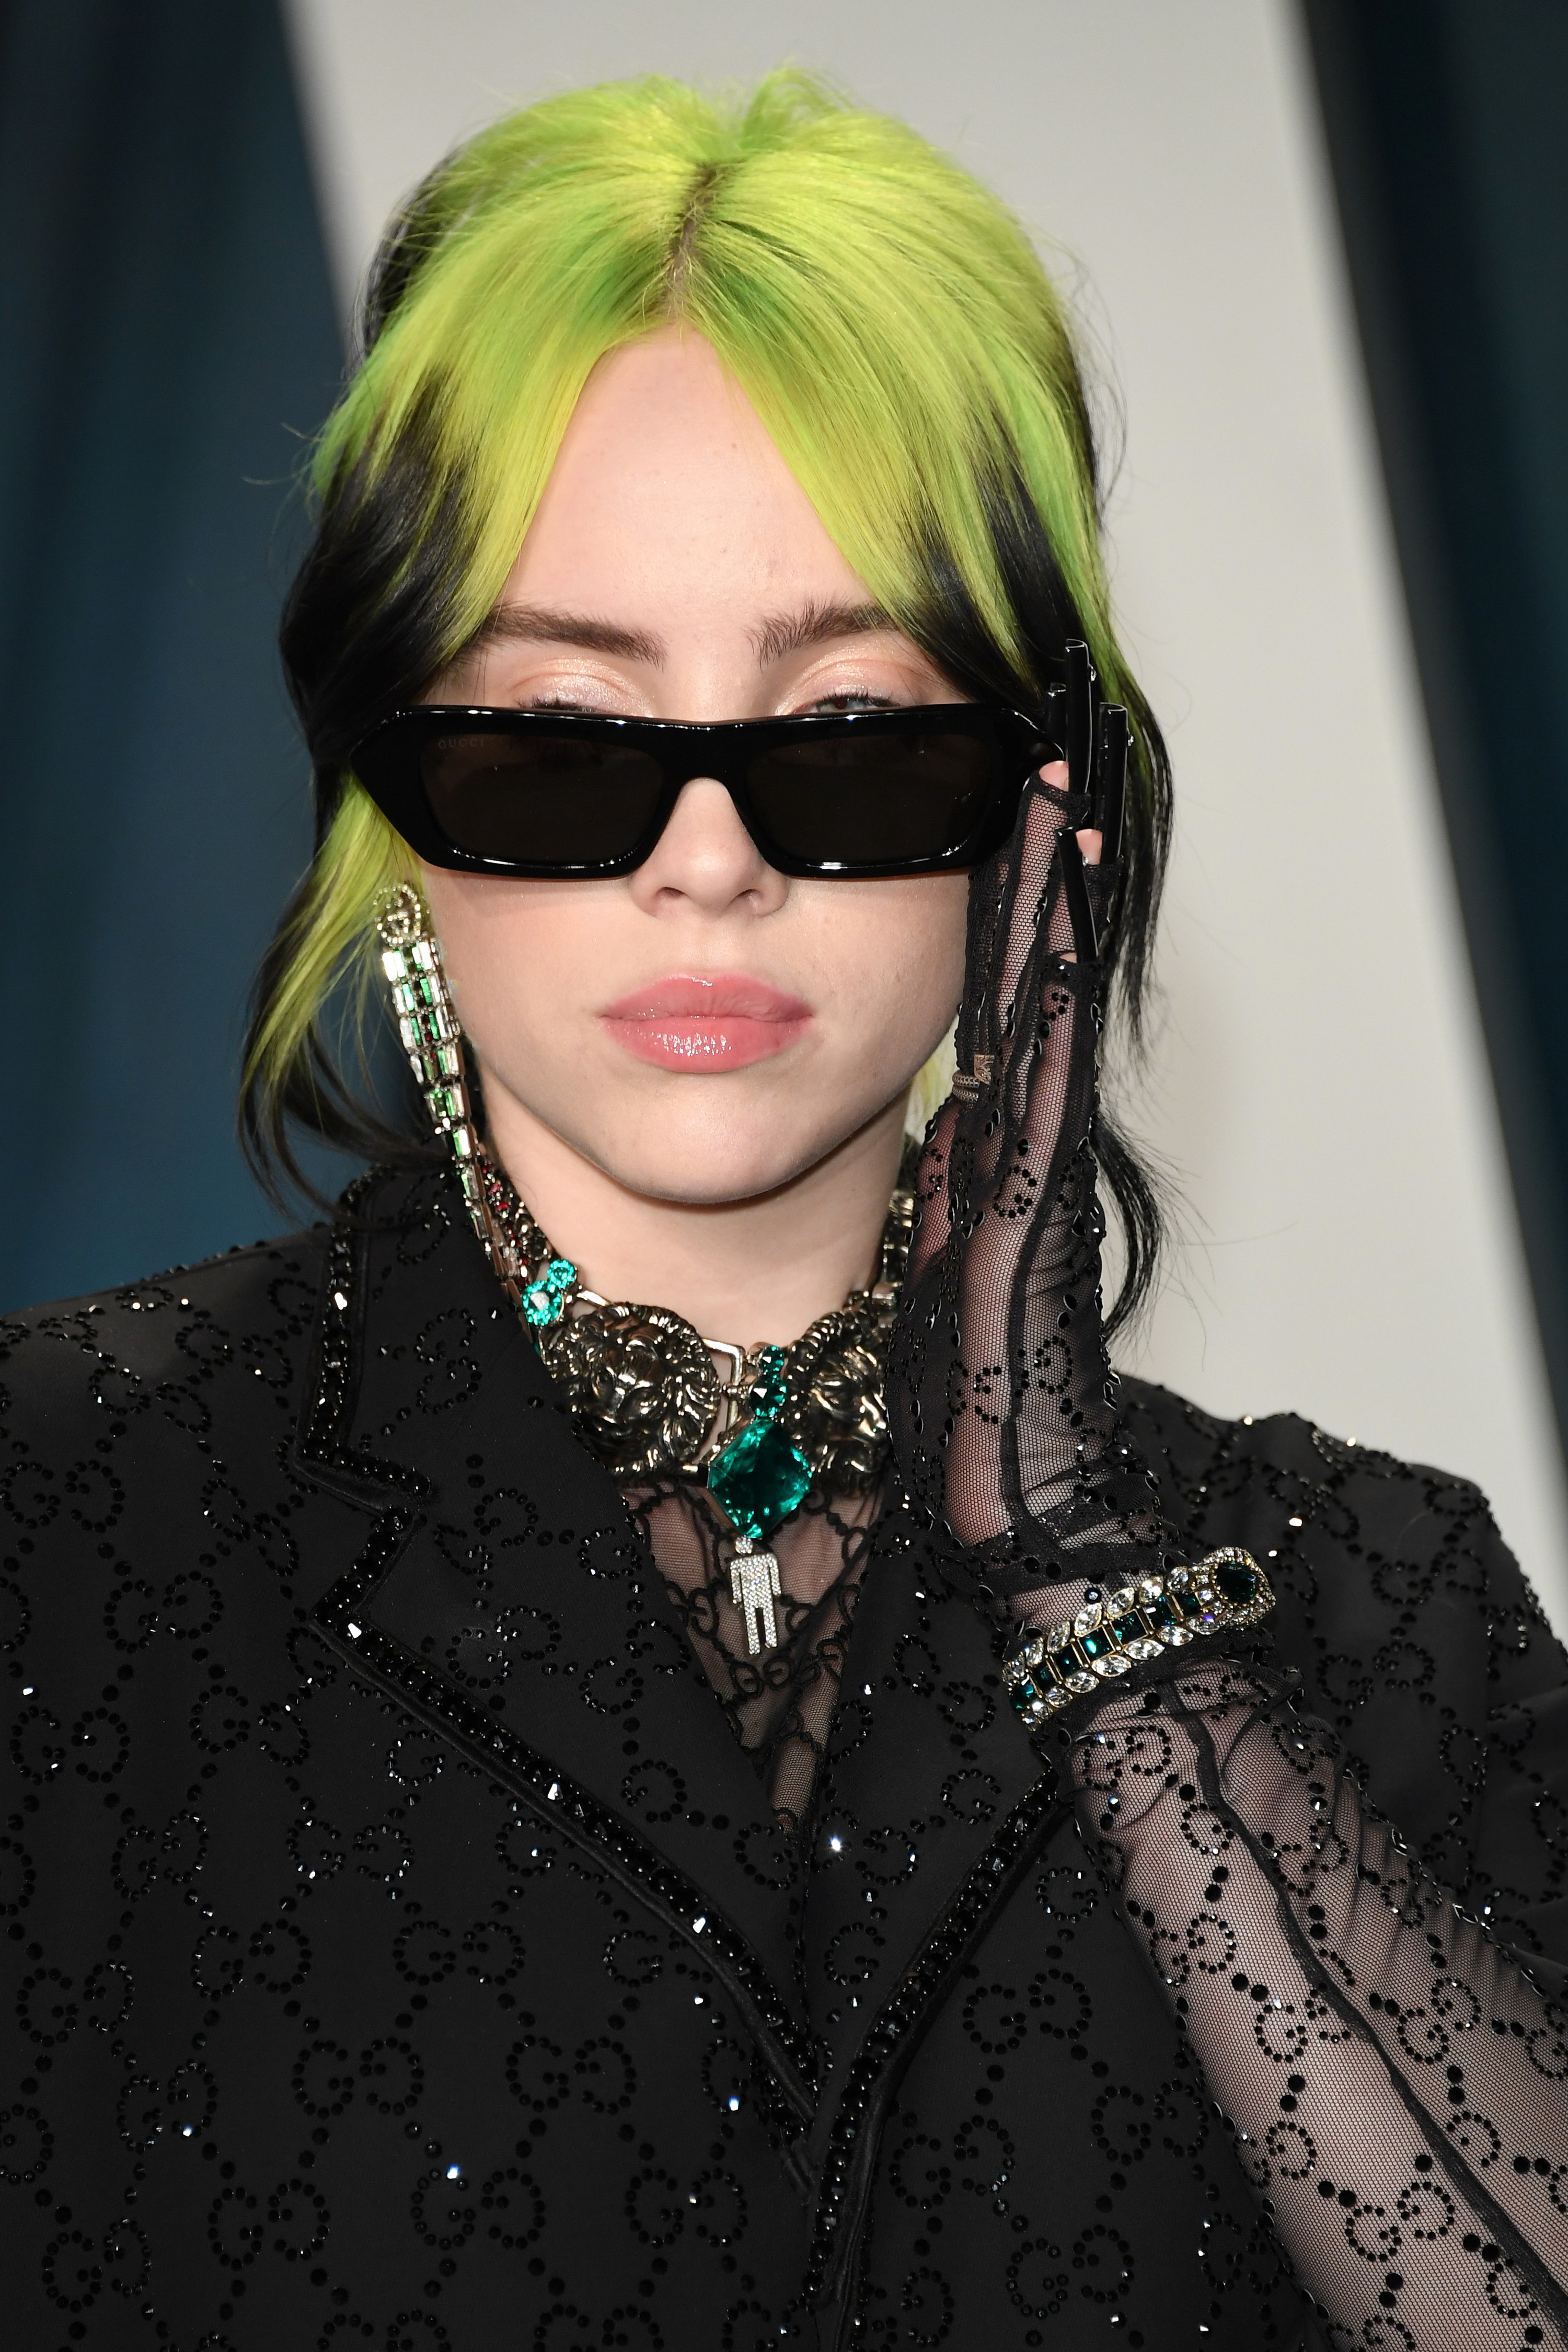 Close-up of Billie wearing sunglasses and multicolored hair